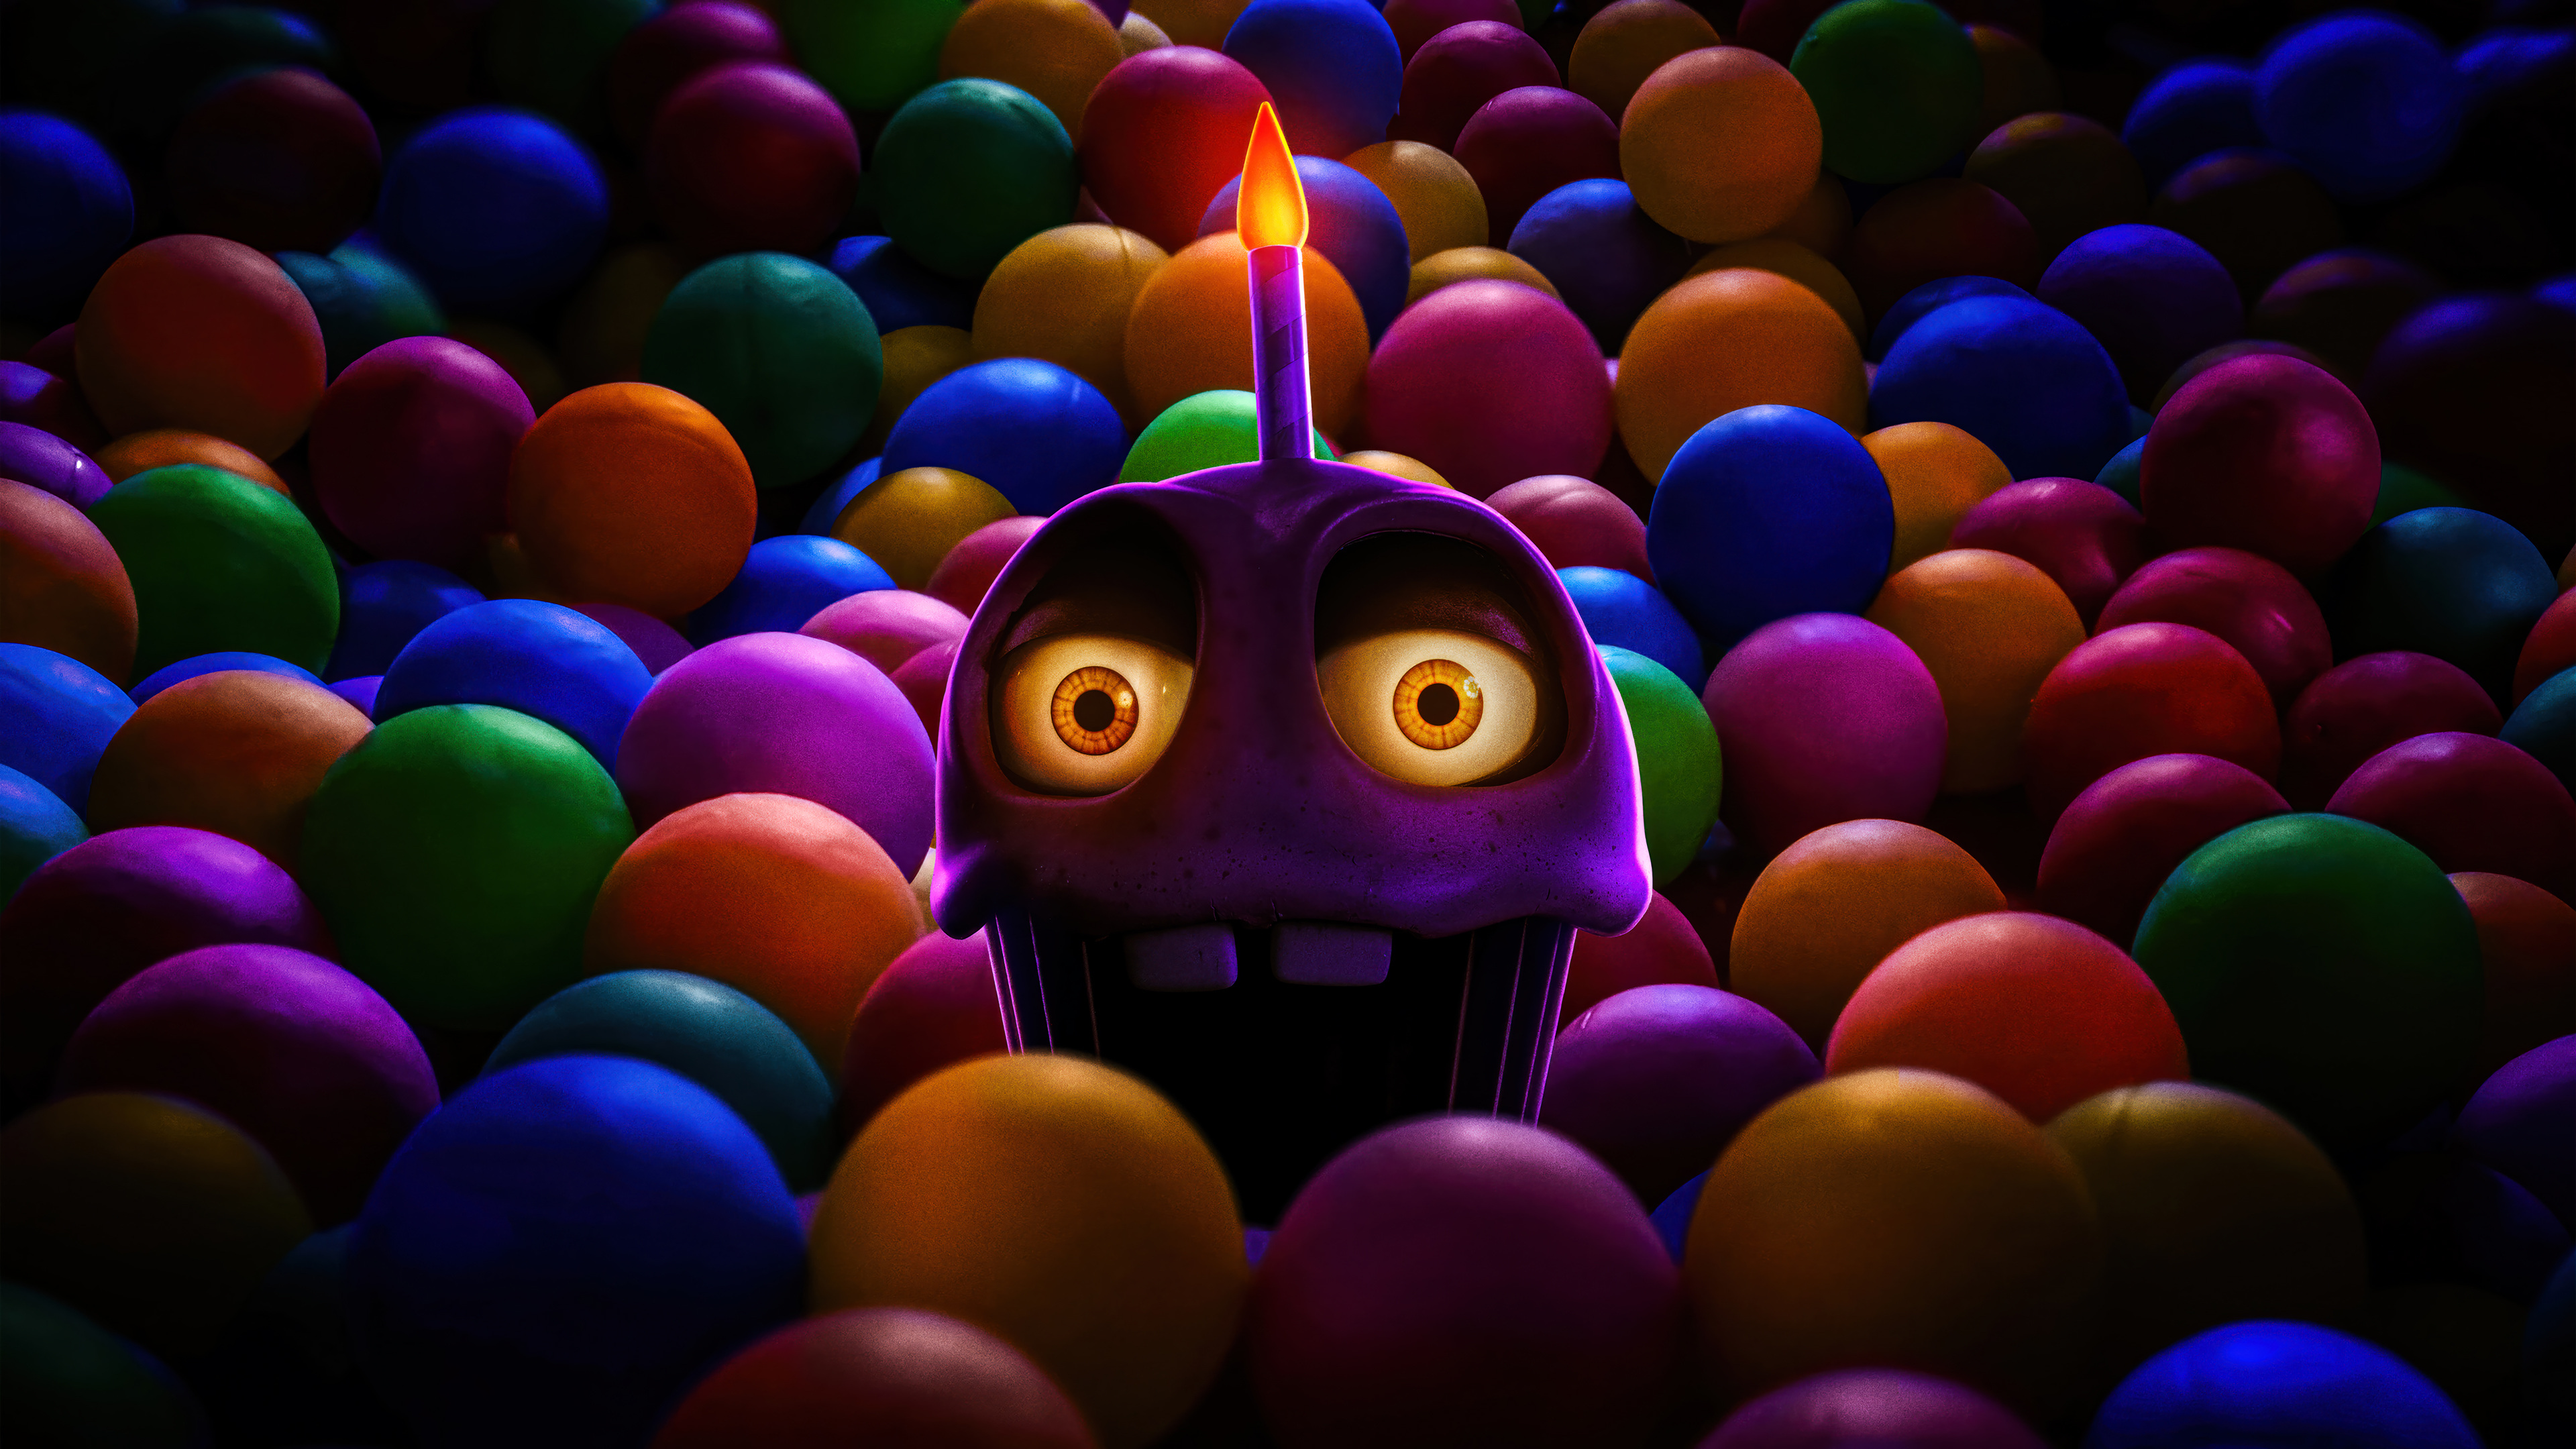 HD wallpaper of a Five Nights at Freddy's character peeking out from a colorful ball pit with a menacing expression, perfect for a desktop background.